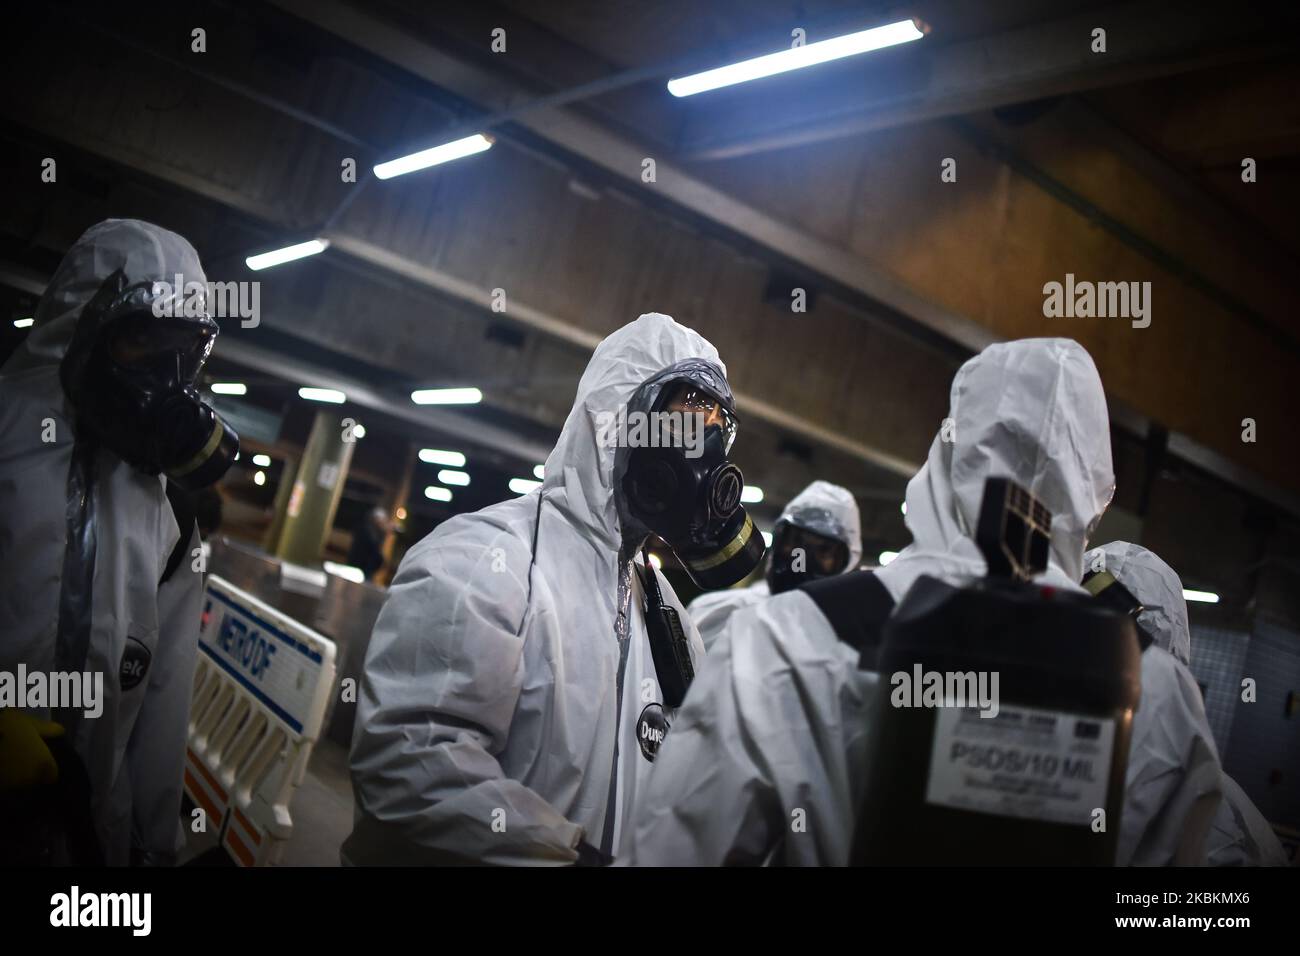 Military soldiers from the Brazilian Army's Chemical, Biological, Radiological and Nuclear Defense Company work on the disinfection of the Central Subway Station in Brasília, Brazil, on March 28, 2020. Decontamination actions in places with high passenger traffic are part of the prevention and fight against the Coronavirus (COVID-19). (Photo by Andre Borges/NurPhoto) Stock Photo